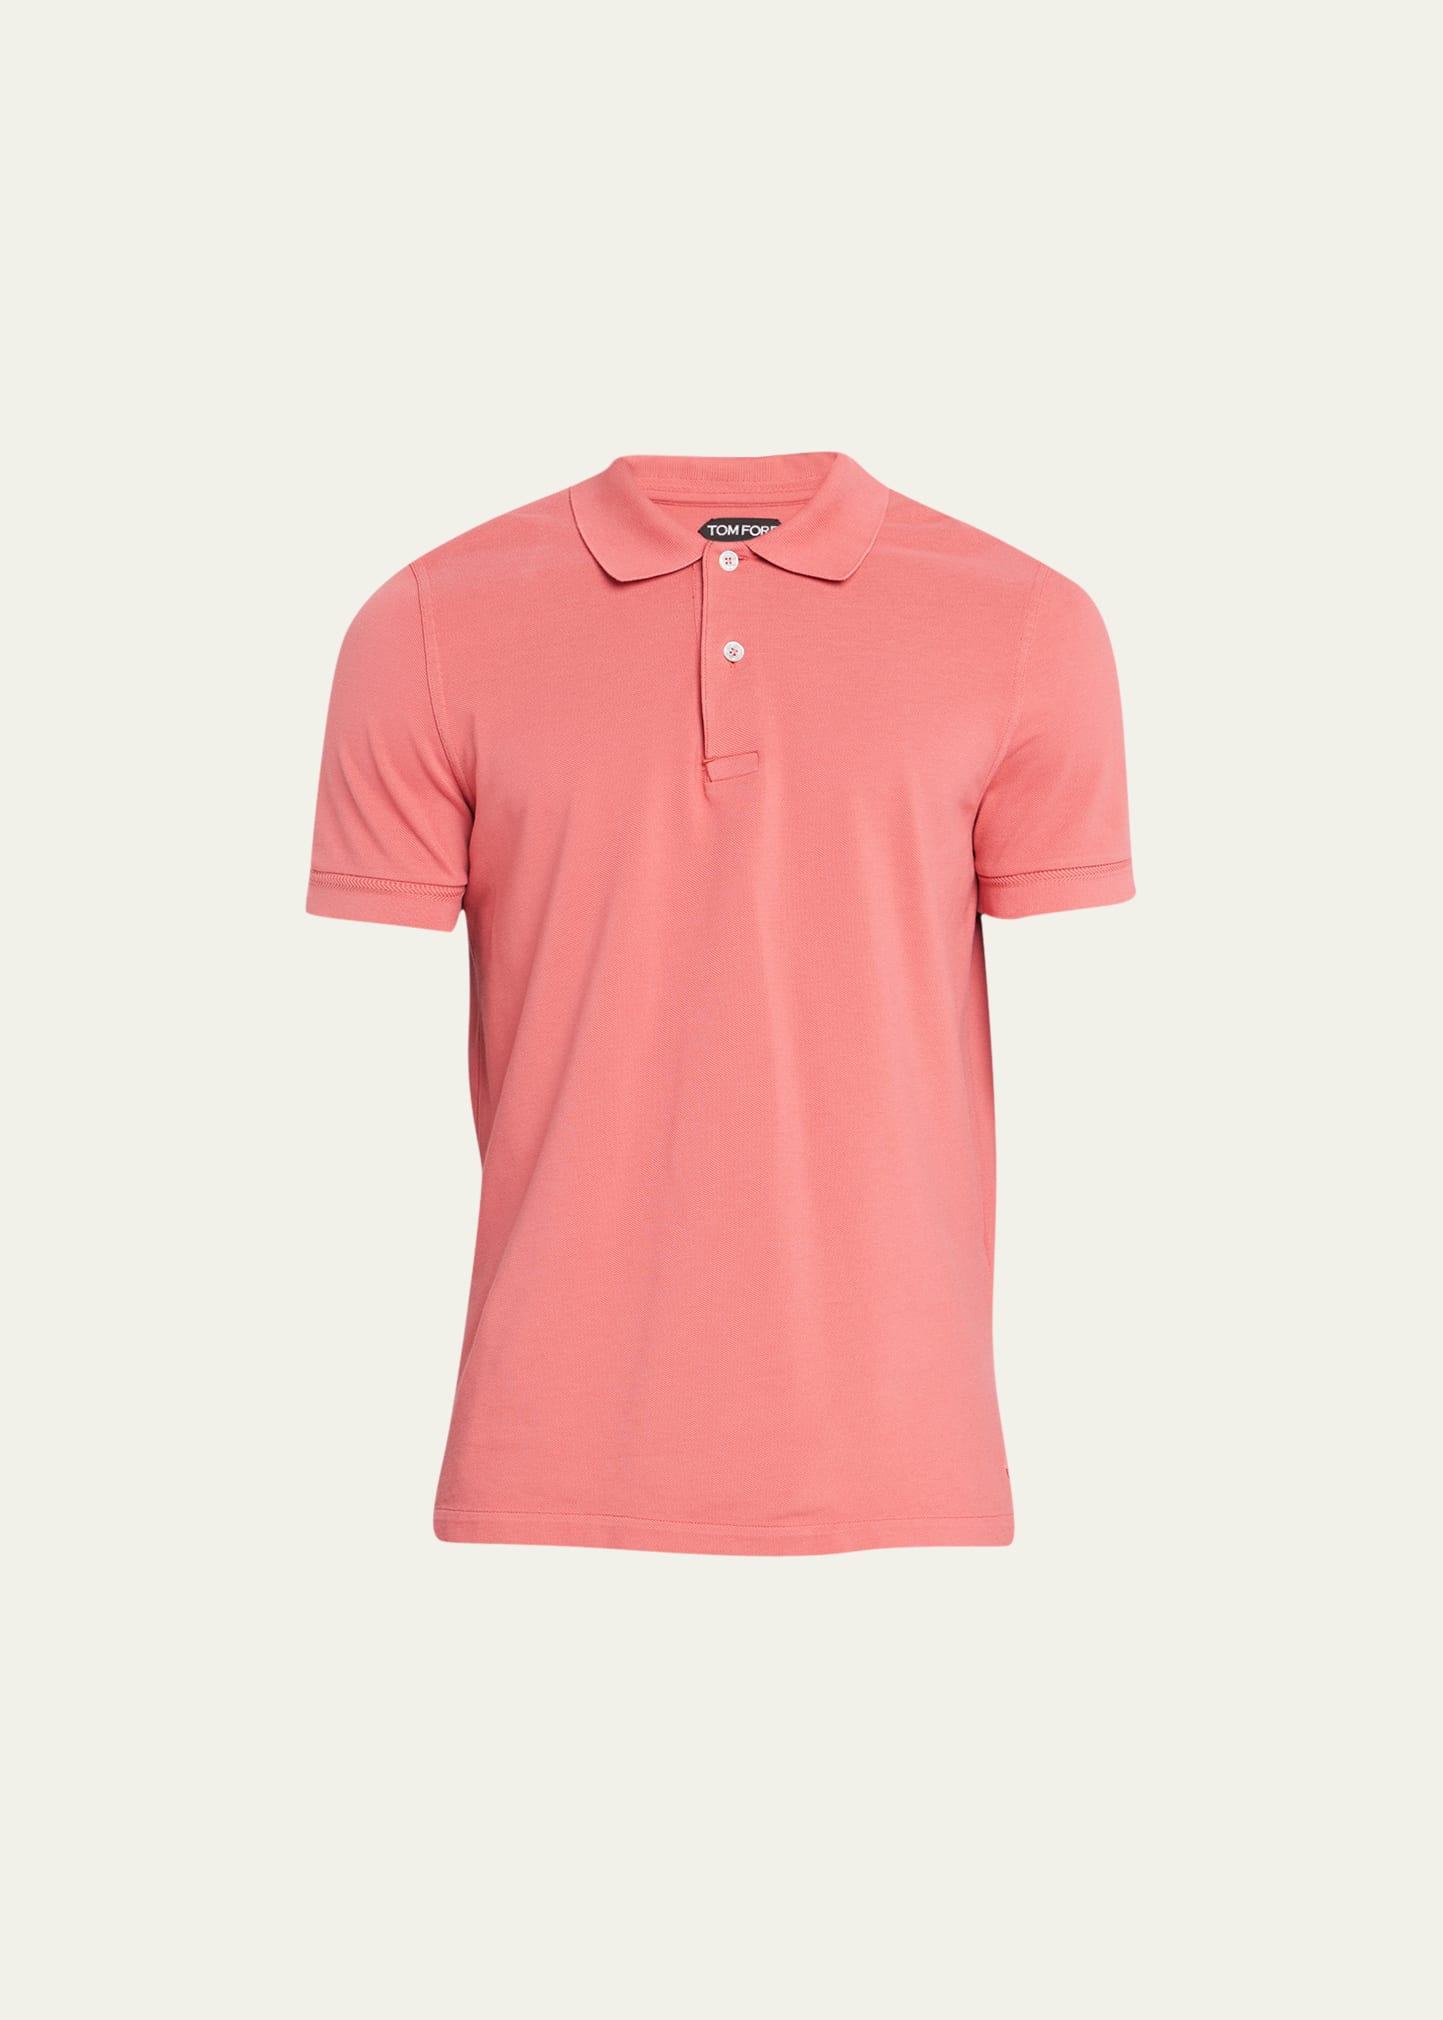 Tom Ford Men's Cotton Pique Polo Shirt In Coral